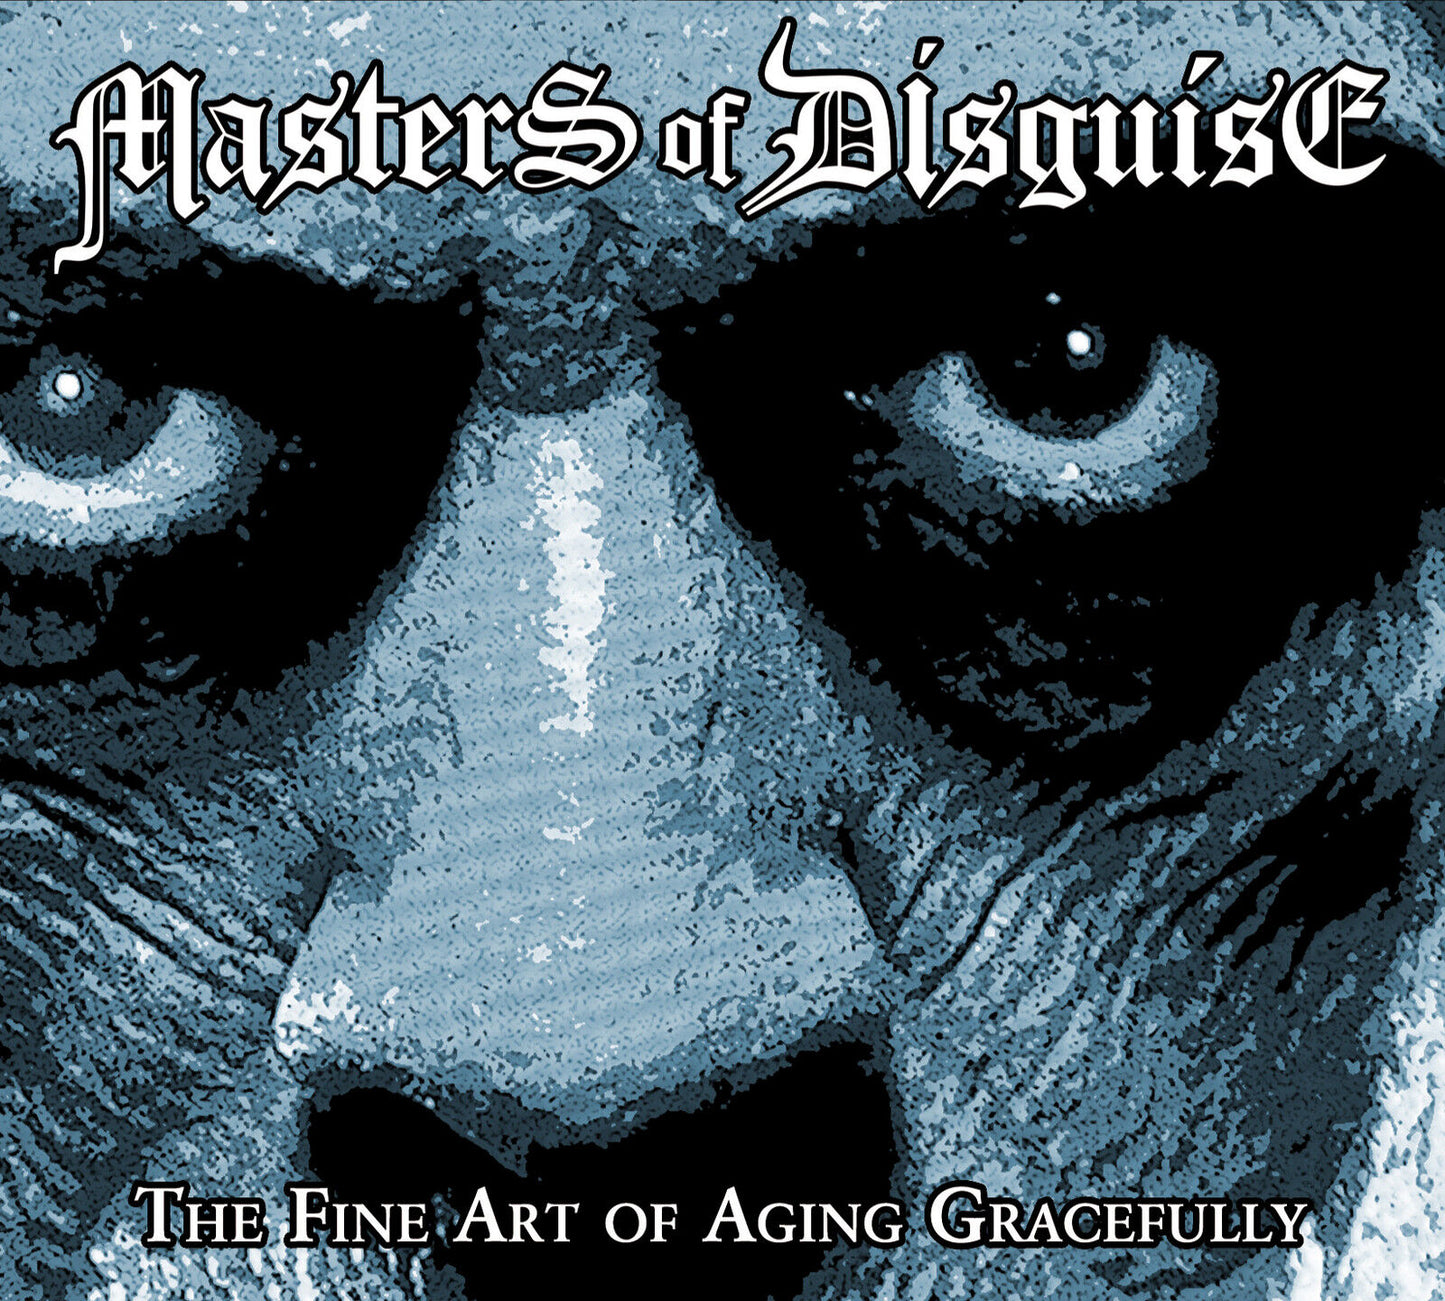 MASTERS OF DISGUISE - The Fine Art of Aging Gracefully Digipak CD 2016 US Metal